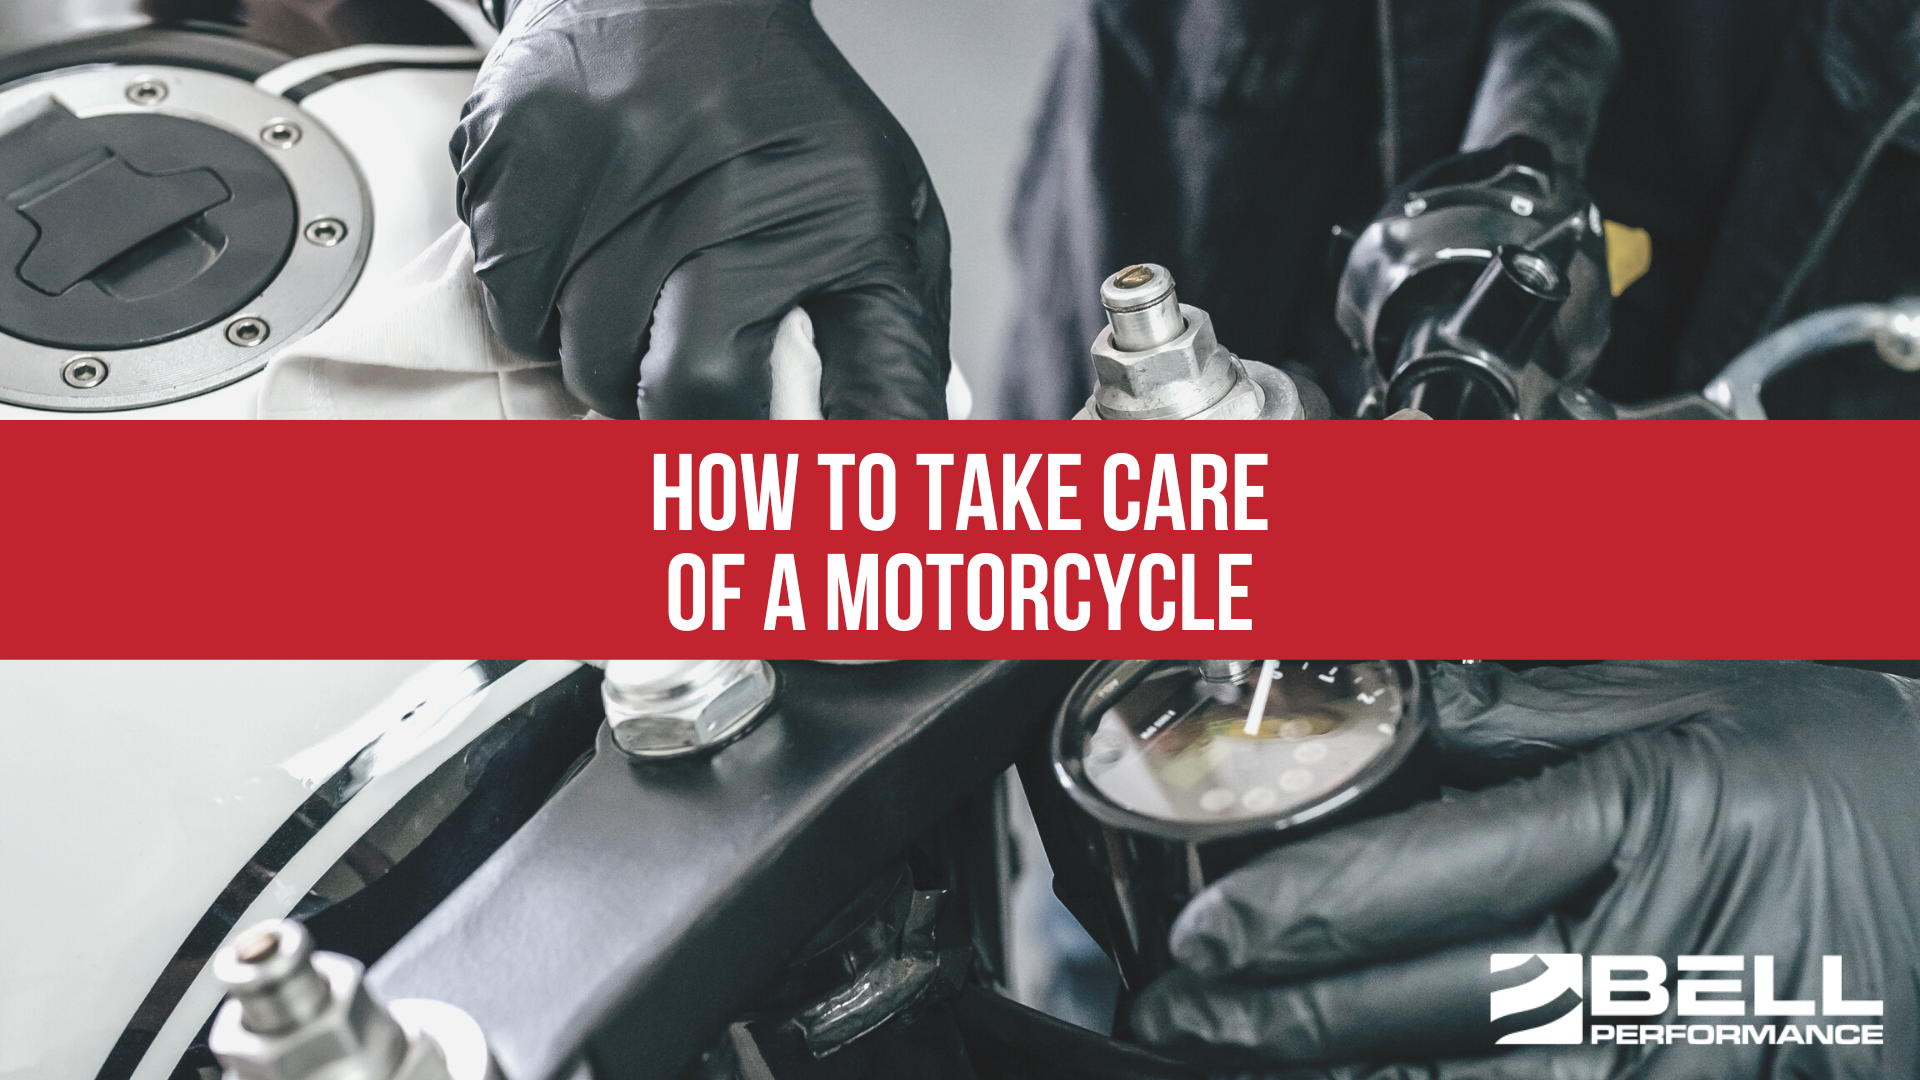 How to Take Care of a Motorcycle